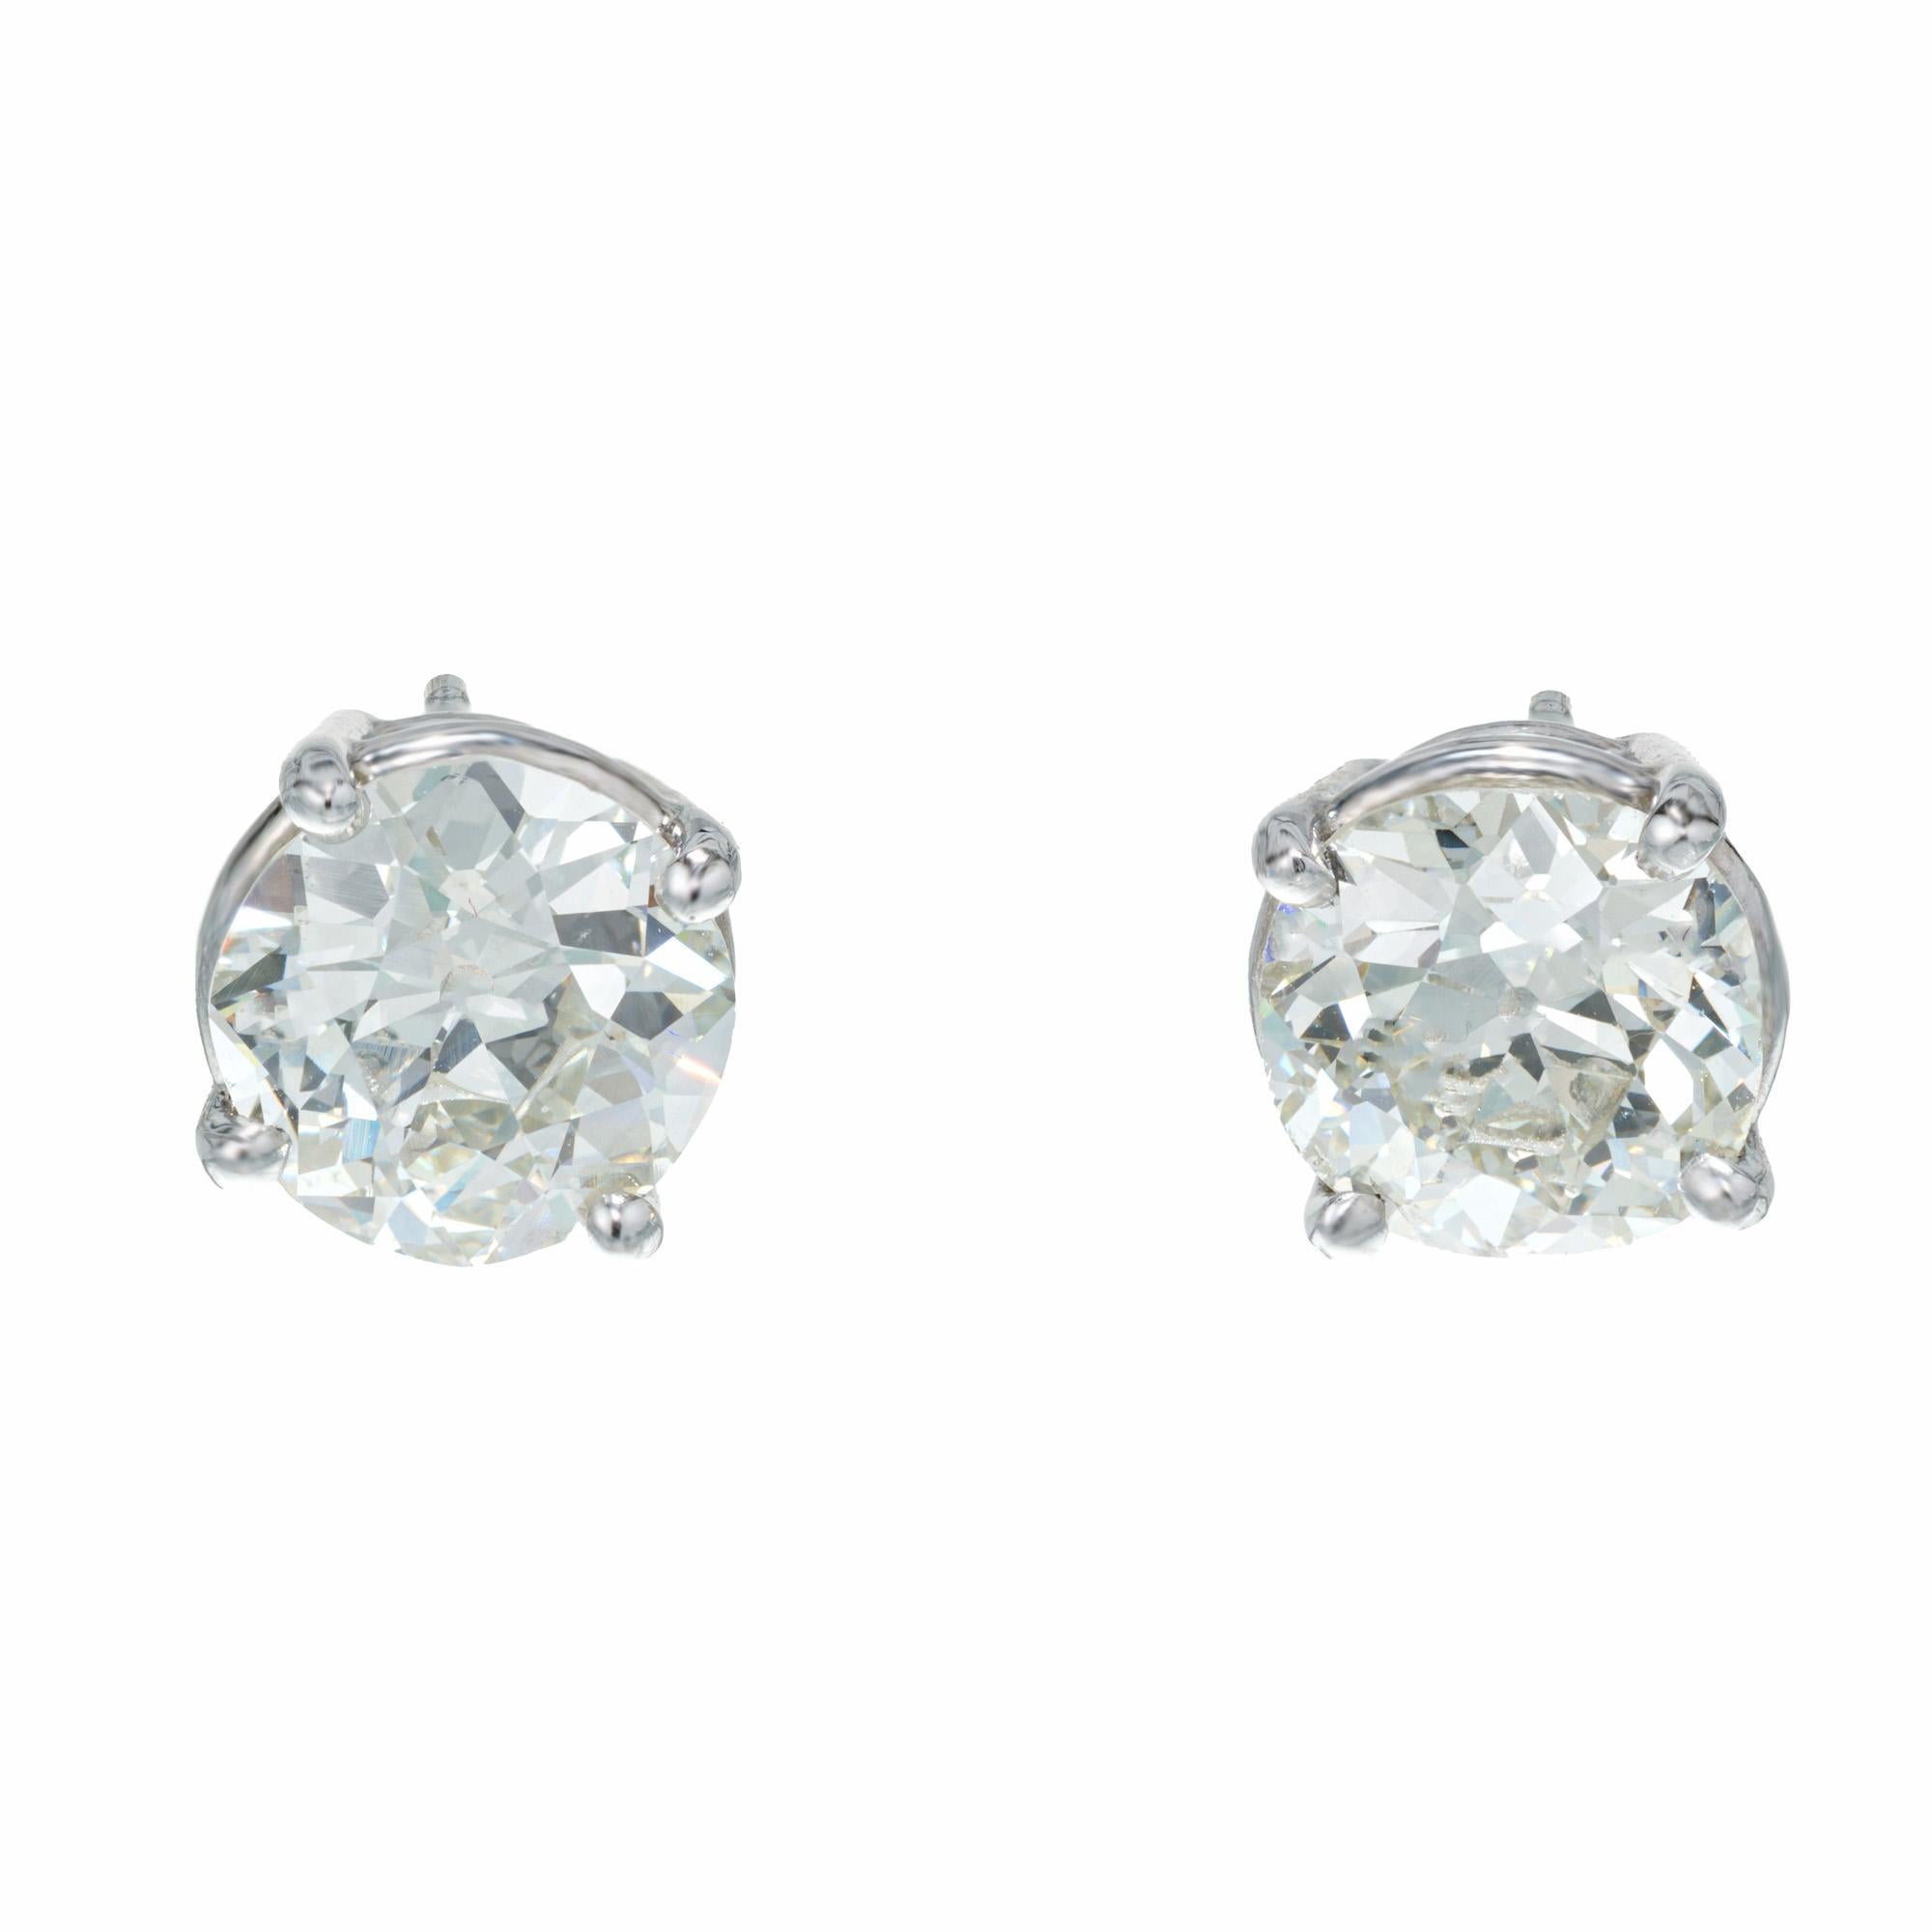 Well matched Old European cut diamond stud earrings. 2, EGL certified I-J (near colorless) round diamonds totaling 3.35cts. Set in simple 4 prong platinum settings. Both stones have equally beautiful with matching brilliance.

1 Old European